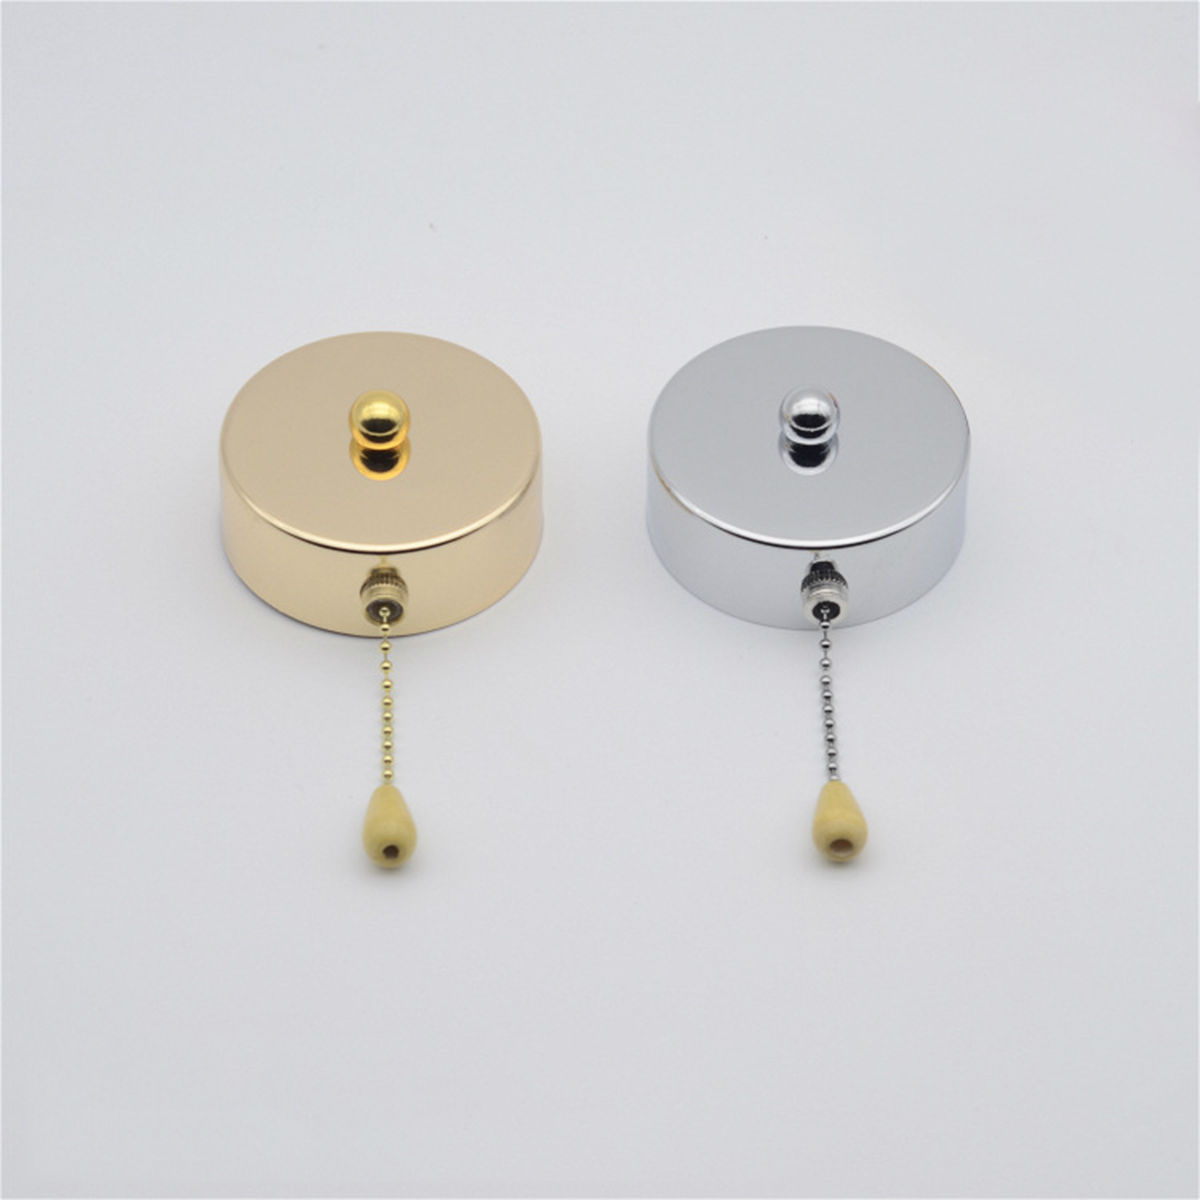 AC220-240V-600W-DIY-Pull-Chain-Light-Switch-for-Ceiling-Fan-Lamp-1418302